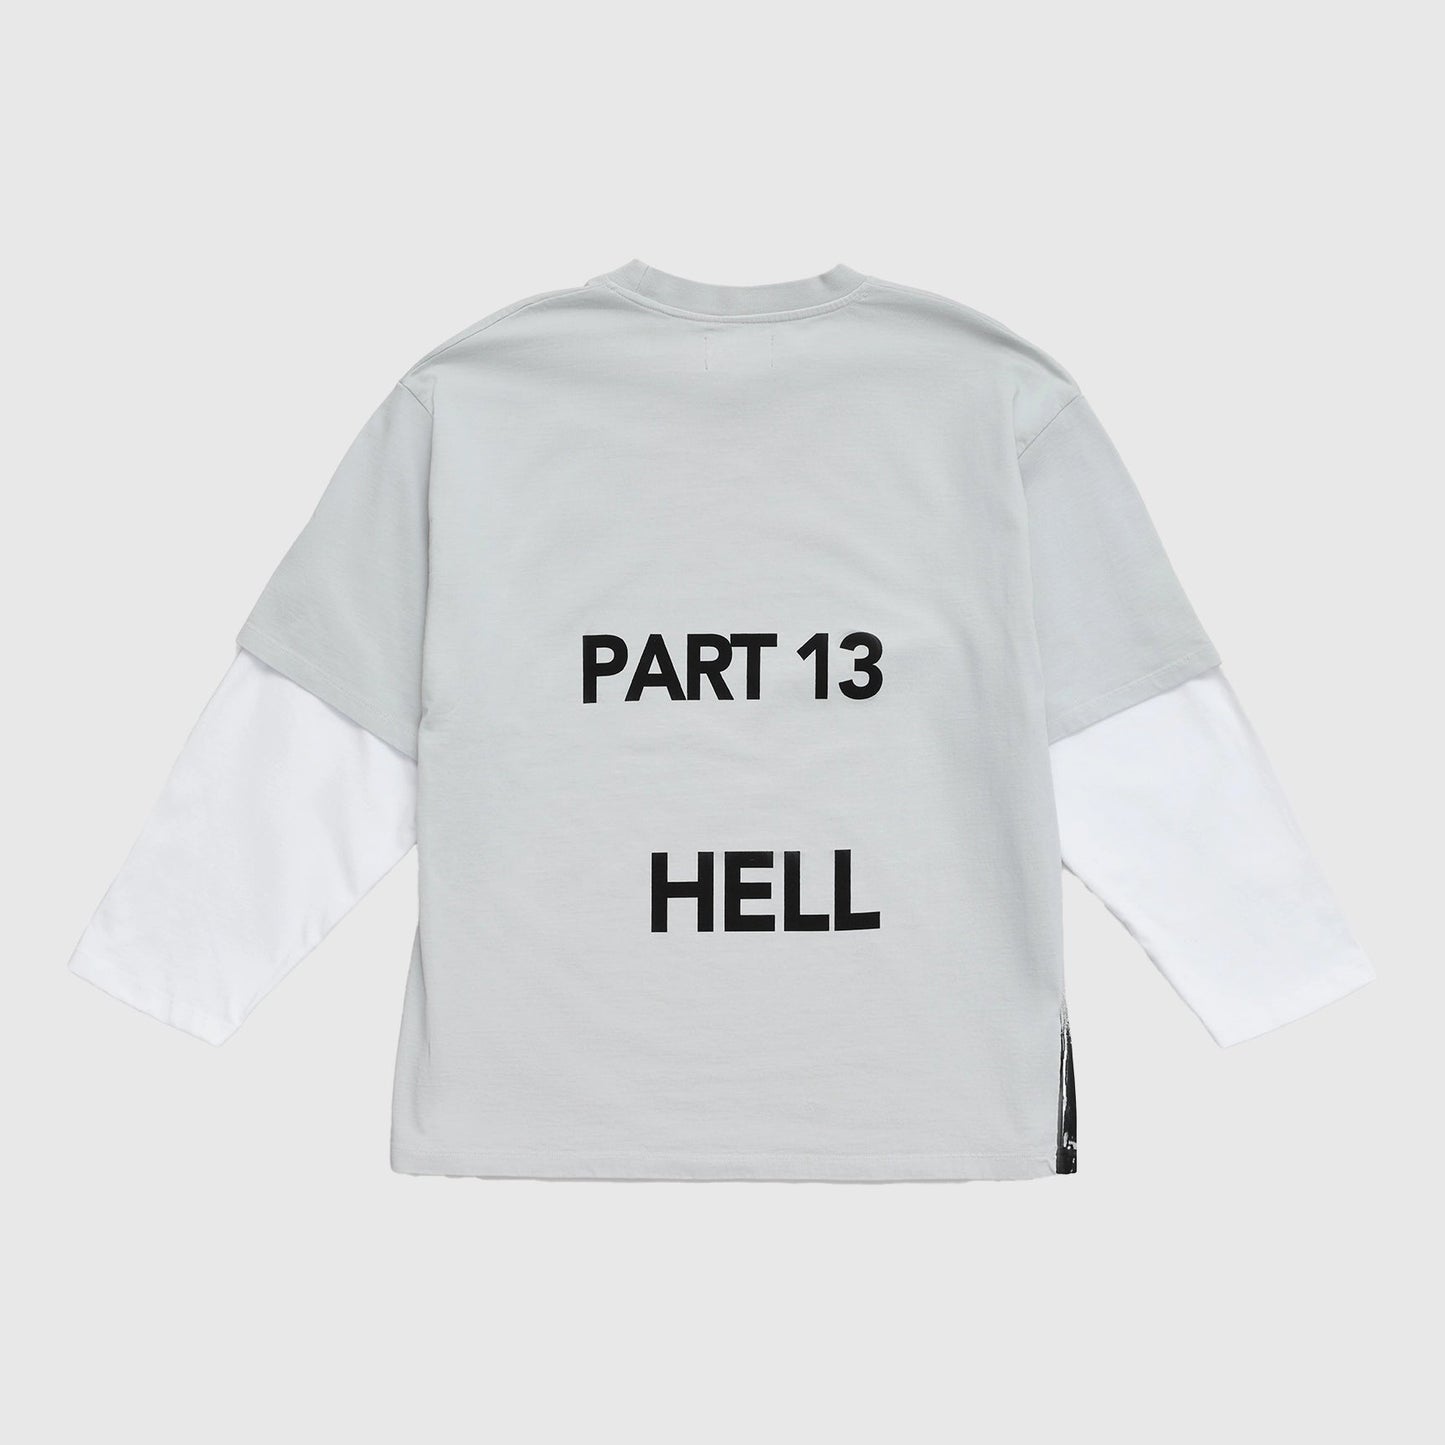 Pteron Studio Box Double Sleeved Part13Hell - Grey / White T-shirt PTERON 